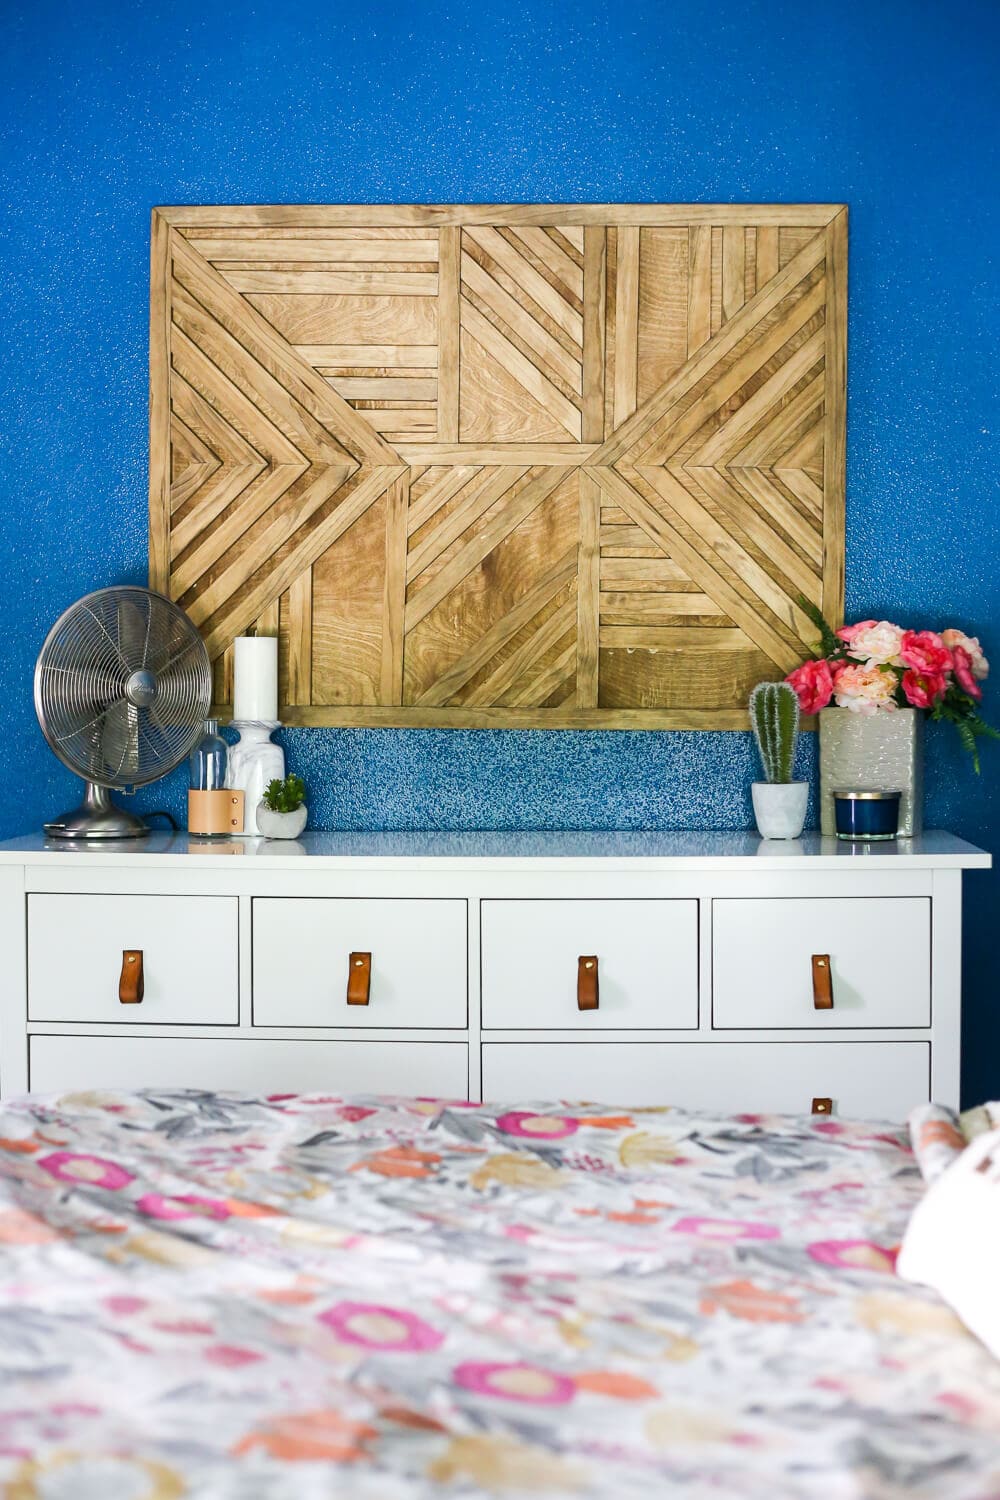 DIY Wood Wall Art - How to Make Your Own! // Love & Renovations